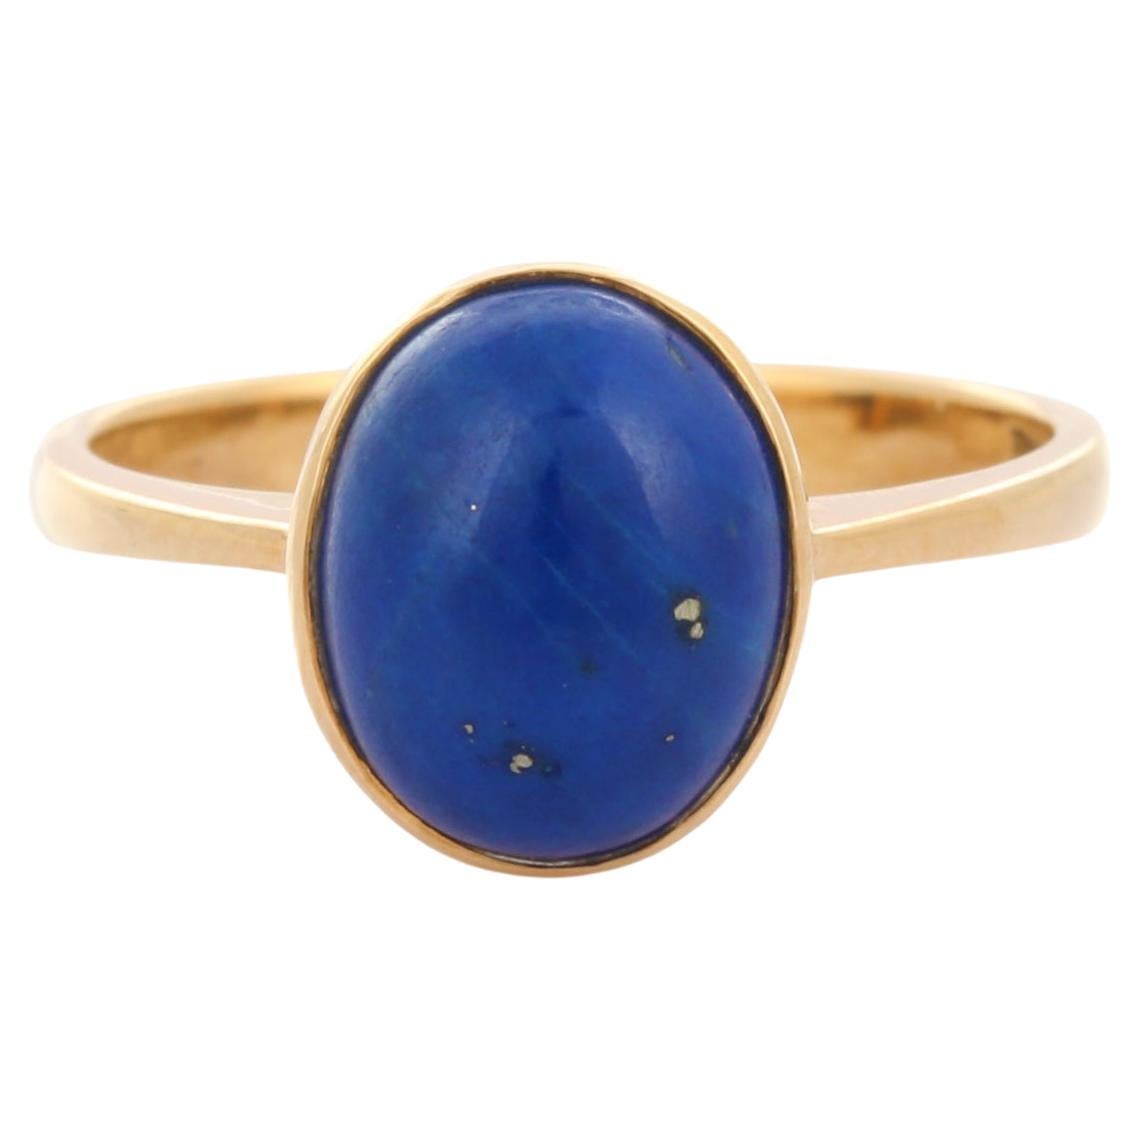 For Sale:  2.87 Carat Lapis Lazuli Solitaire Ring in 18K Yellow Gold